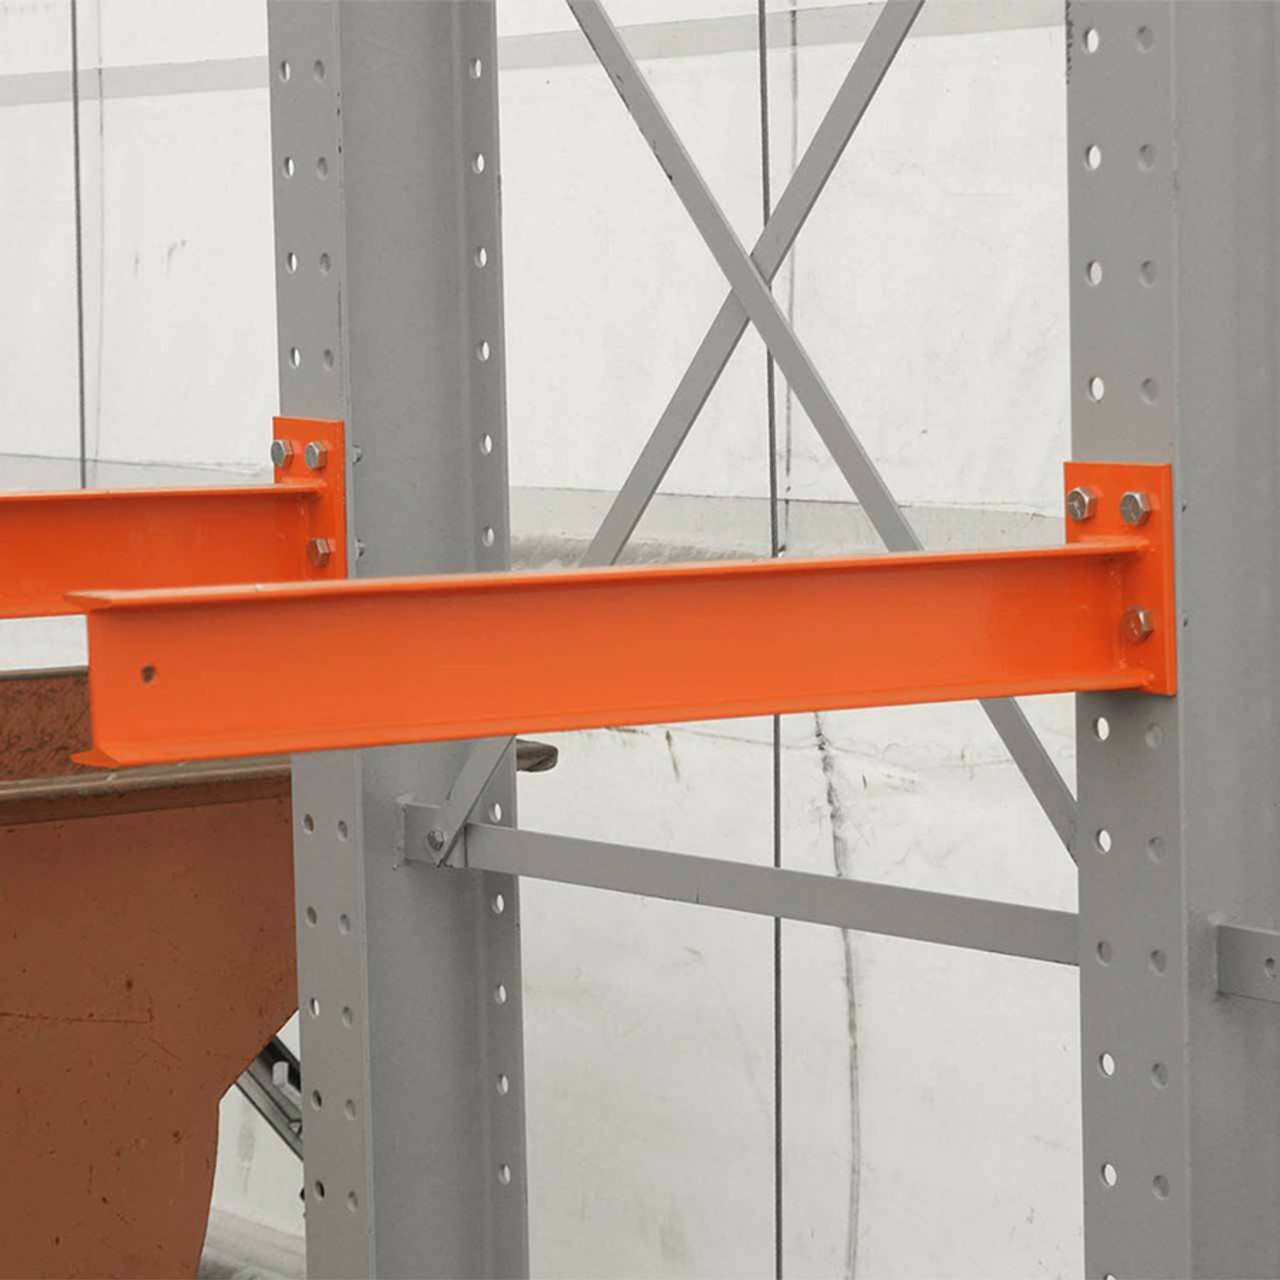 CANTILEVER RACK ARMS